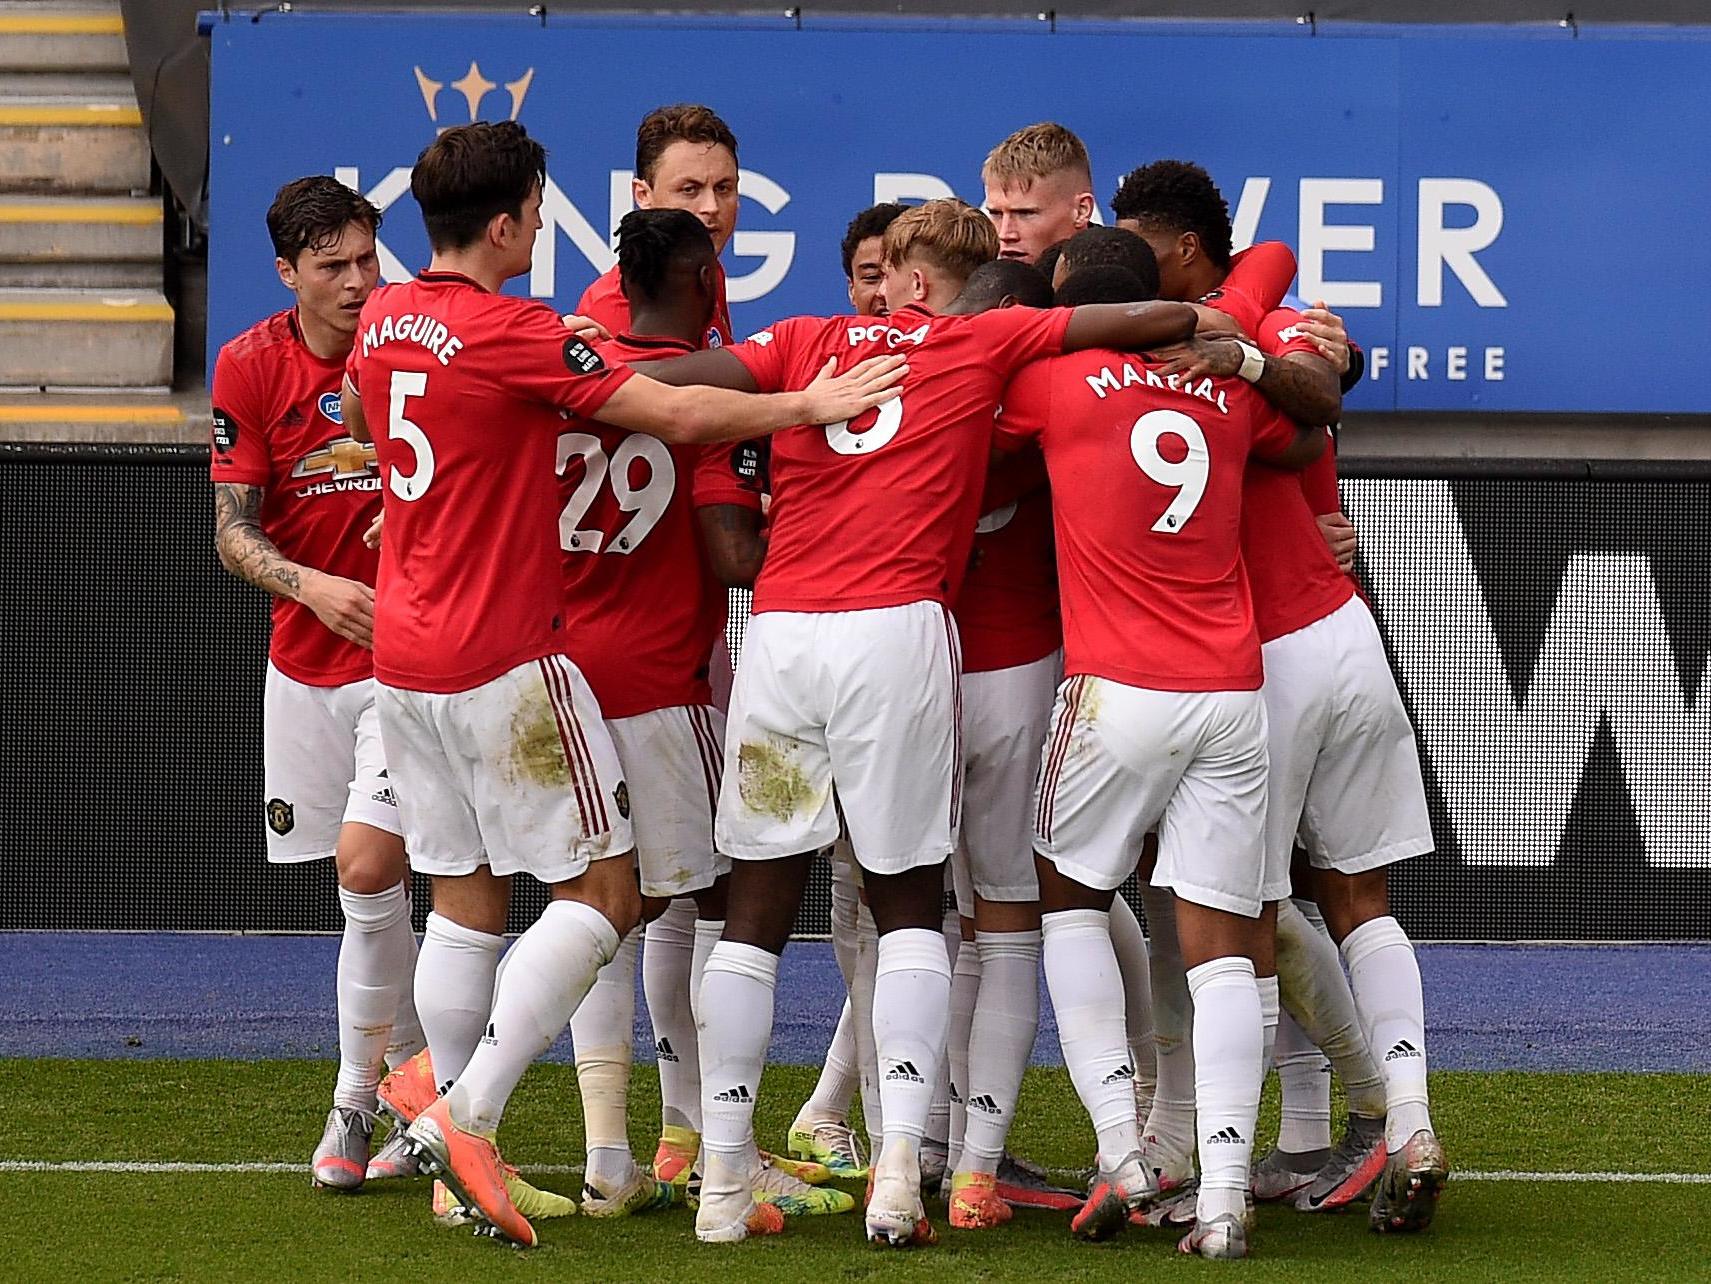 Manchester United predicted lineup vs Leicester City Image Credits: Getty Images